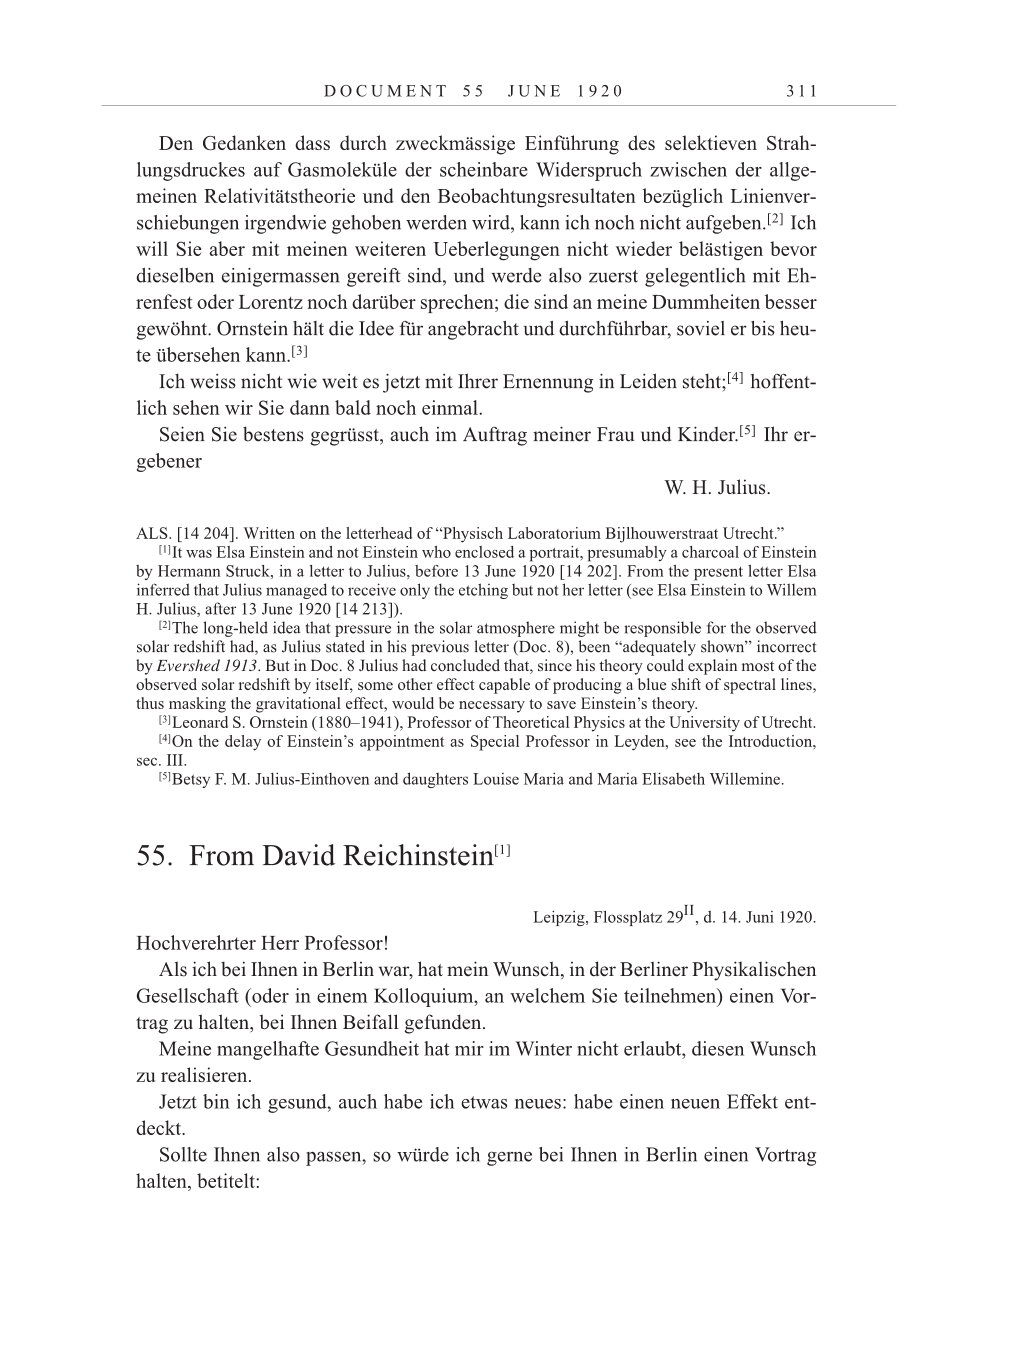 Volume 10: The Berlin Years: Correspondence May-December 1920 / Supplementary Correspondence 1909-1920 page 311